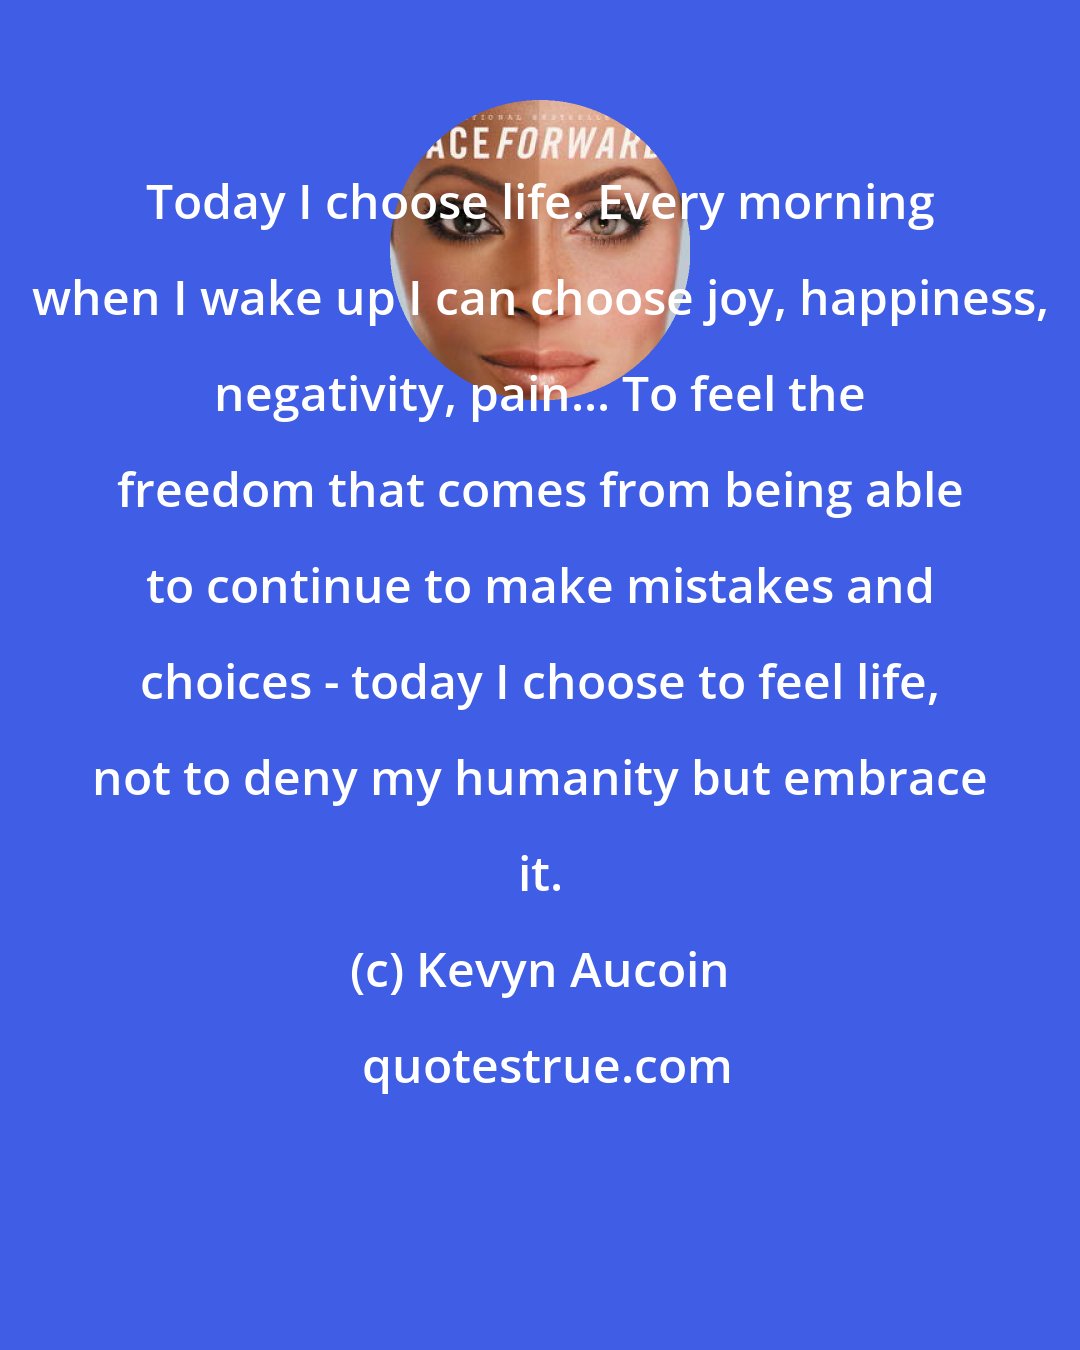 Kevyn Aucoin: Today I choose life. Every morning when I wake up I can choose joy, happiness, negativity, pain... To feel the freedom that comes from being able to continue to make mistakes and choices - today I choose to feel life, not to deny my humanity but embrace it.